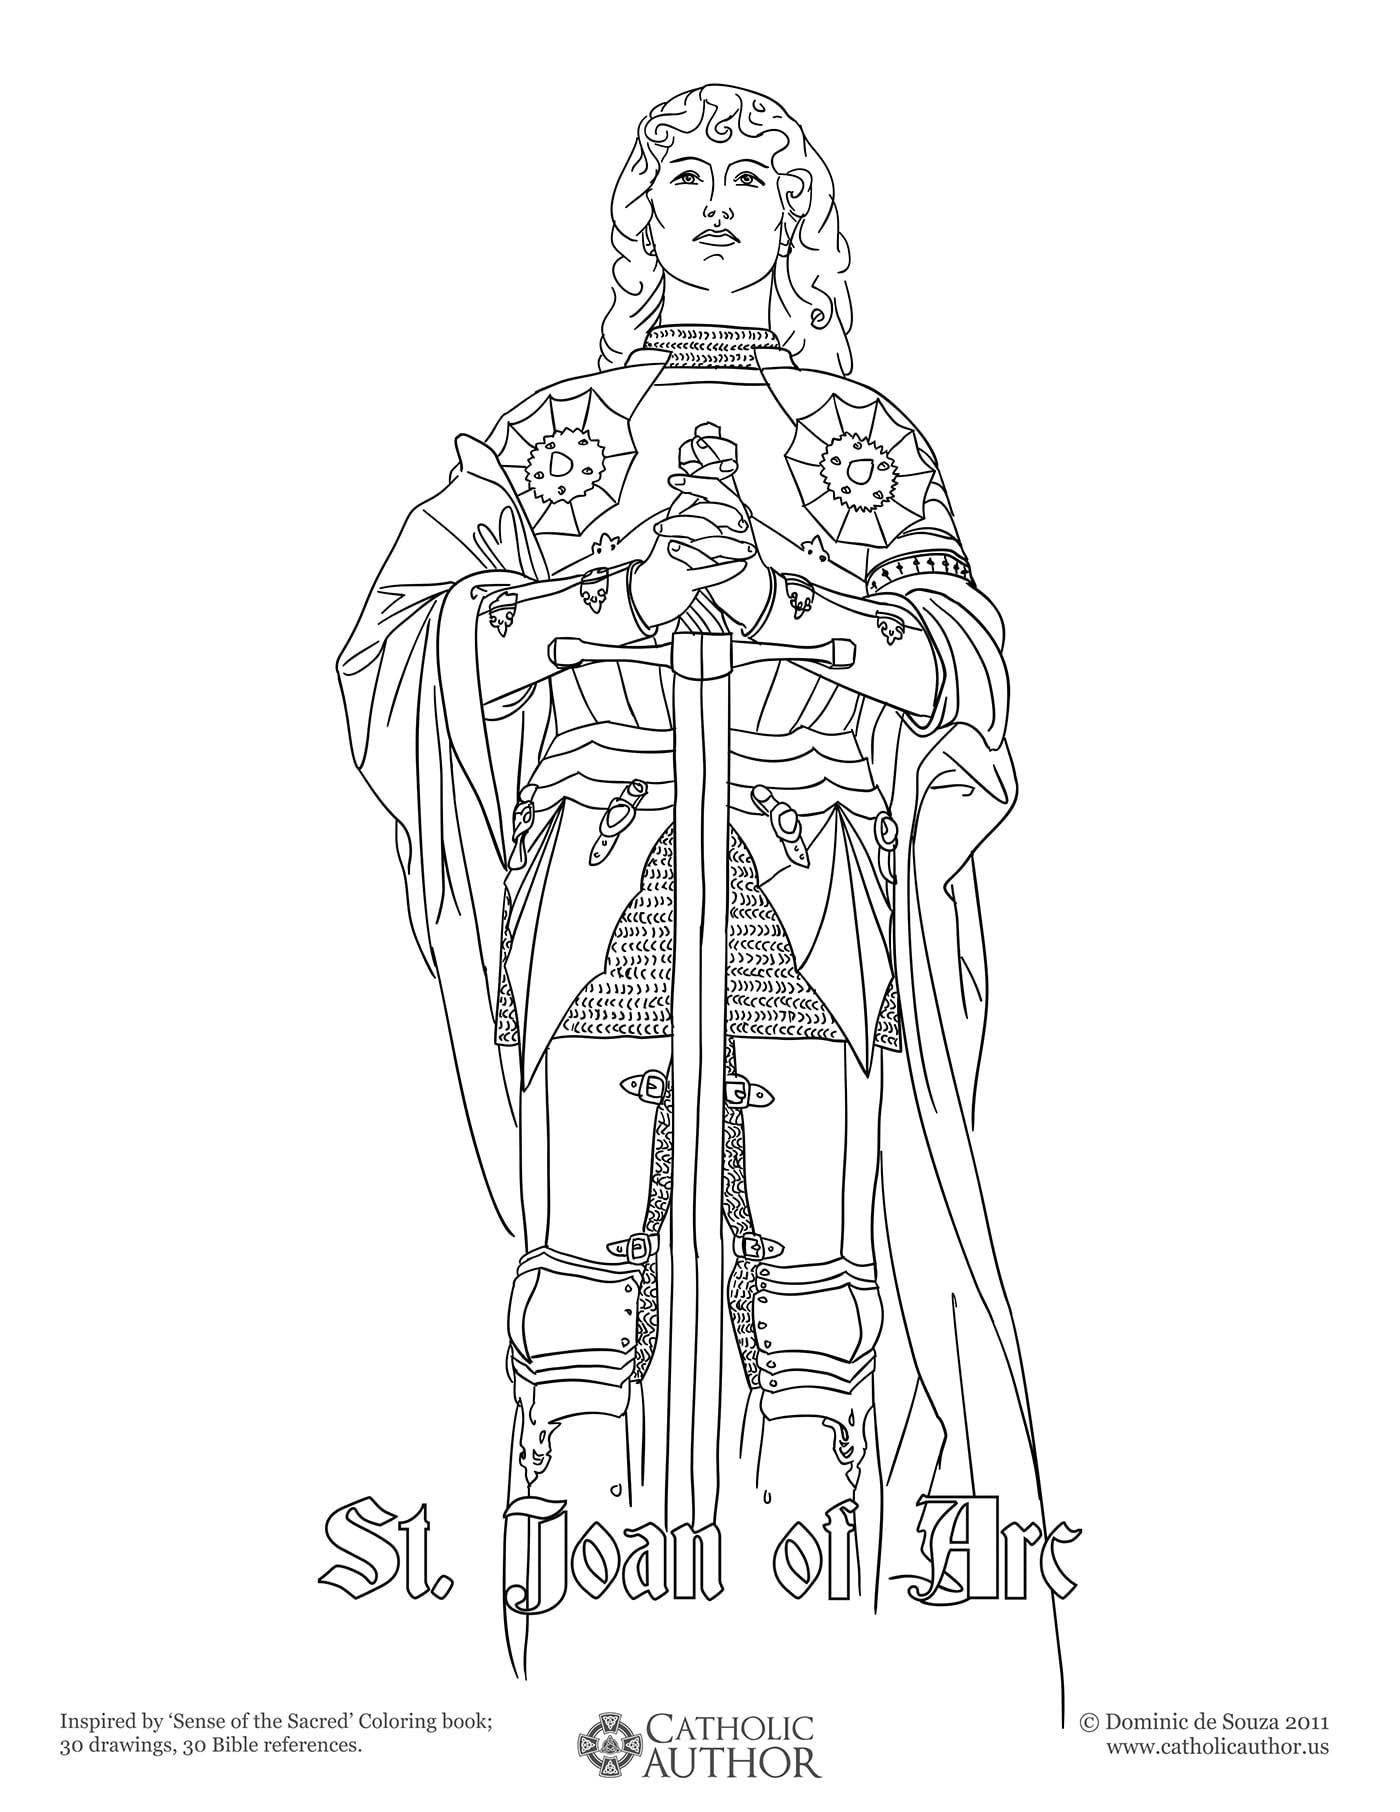 12 Free HandDrawn Catholic Coloring Pictures » CatholicViral